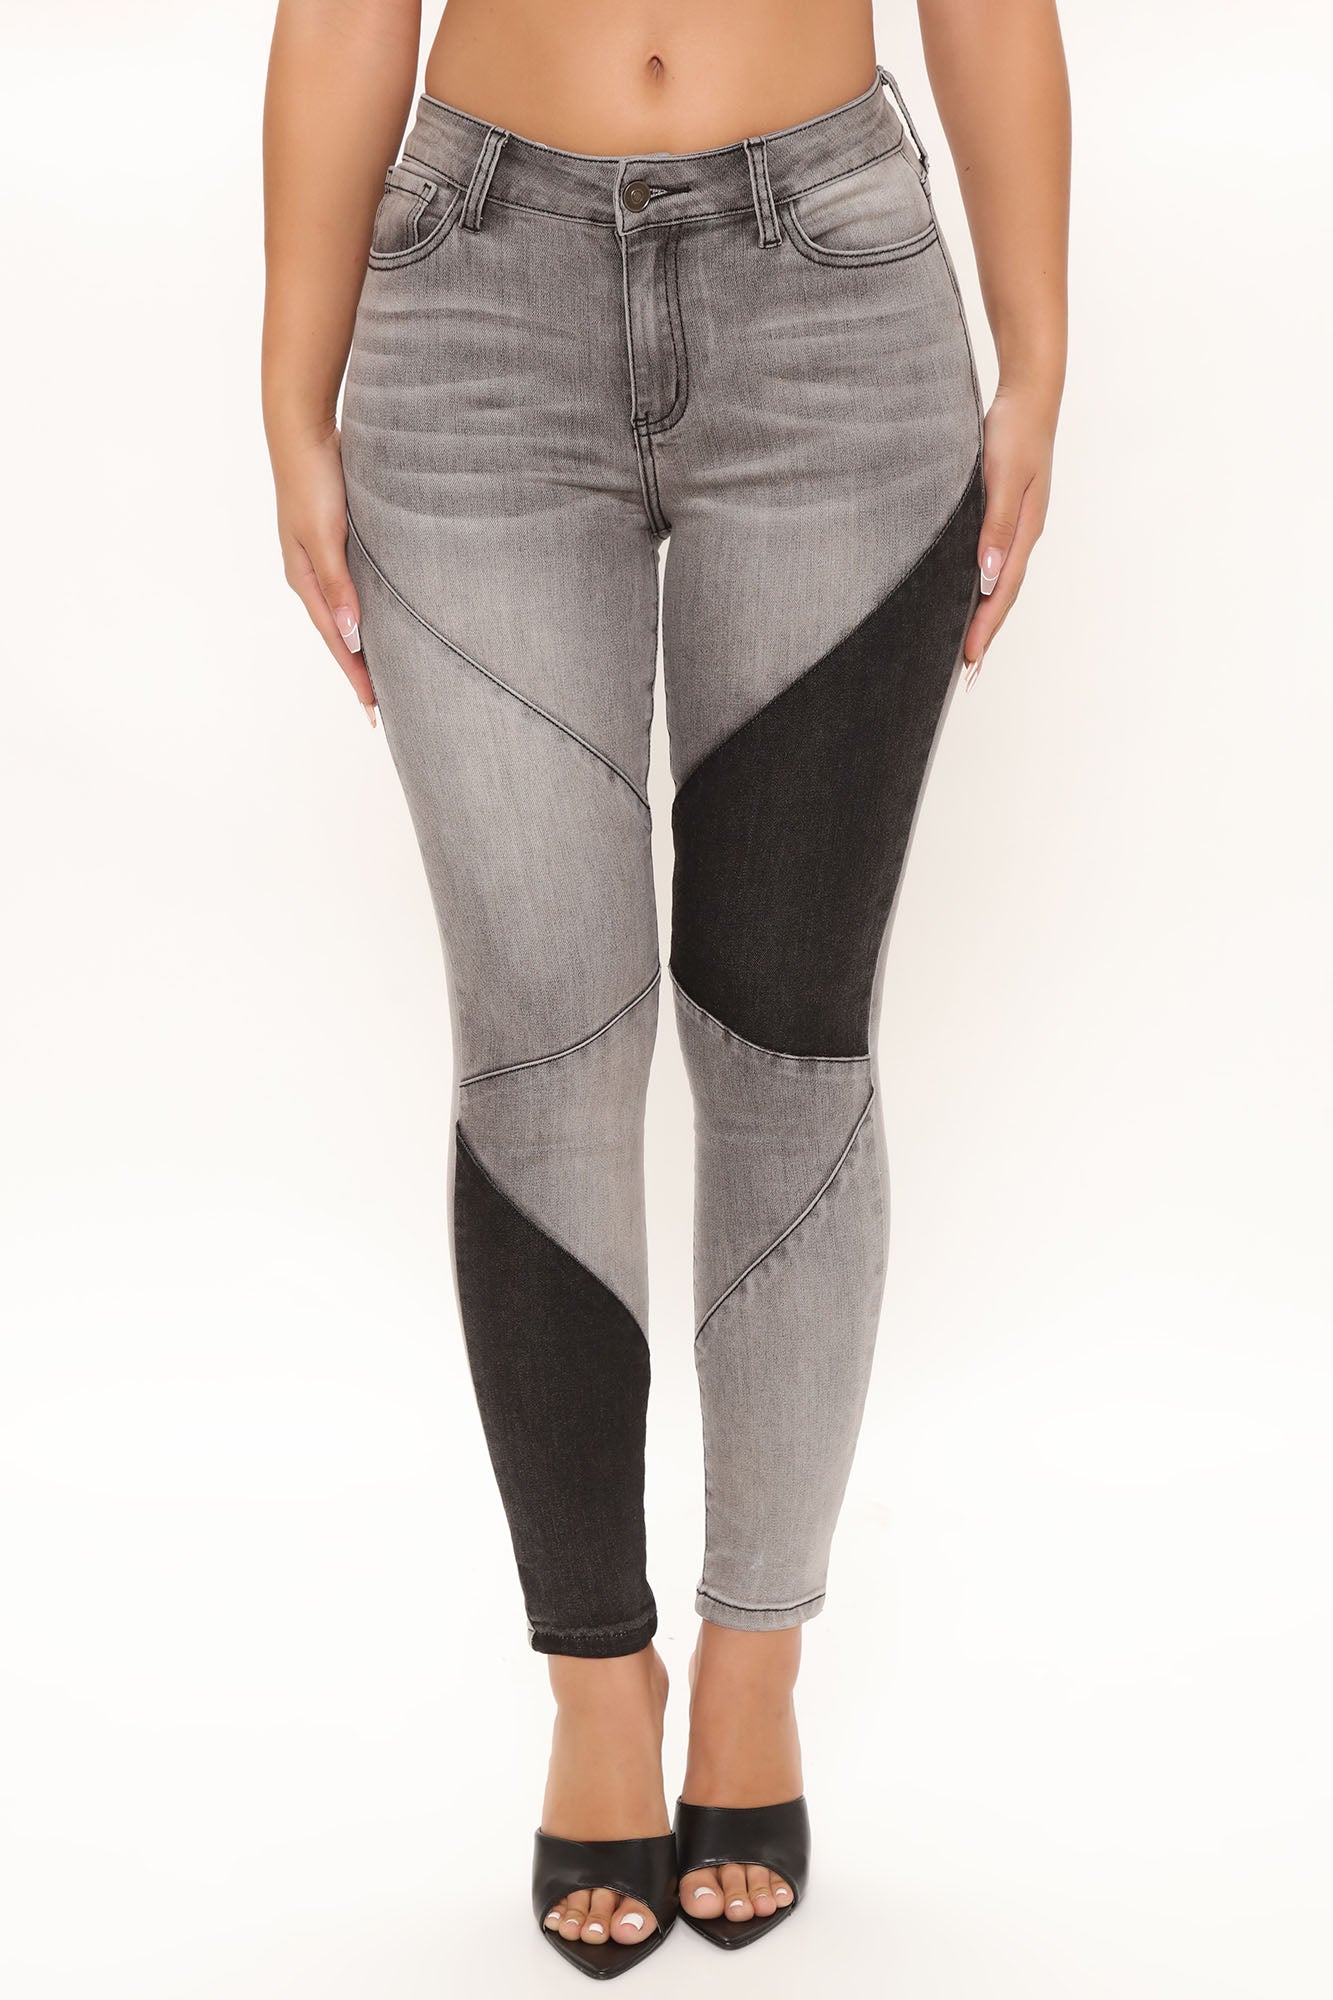 Stay In Line Mid Rise Skinny Jeans - Grey/Black